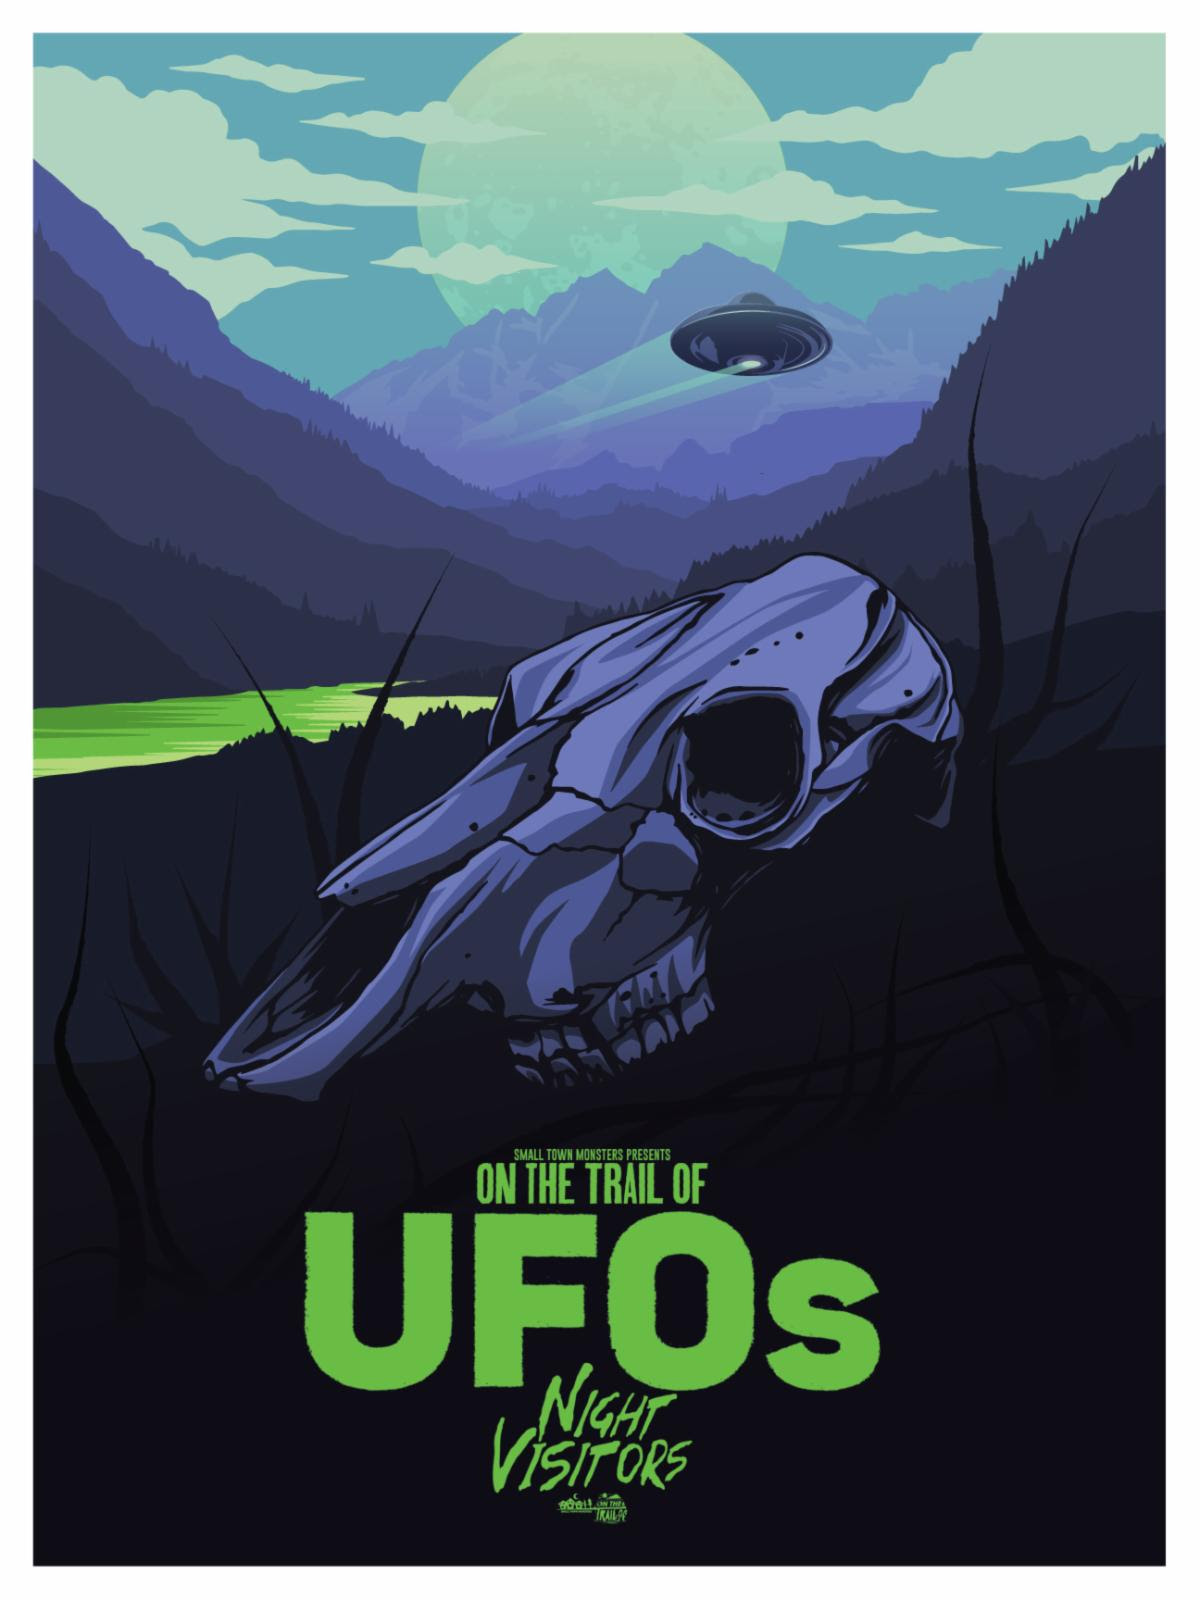 On the Trail of UFOs – Night Visitors